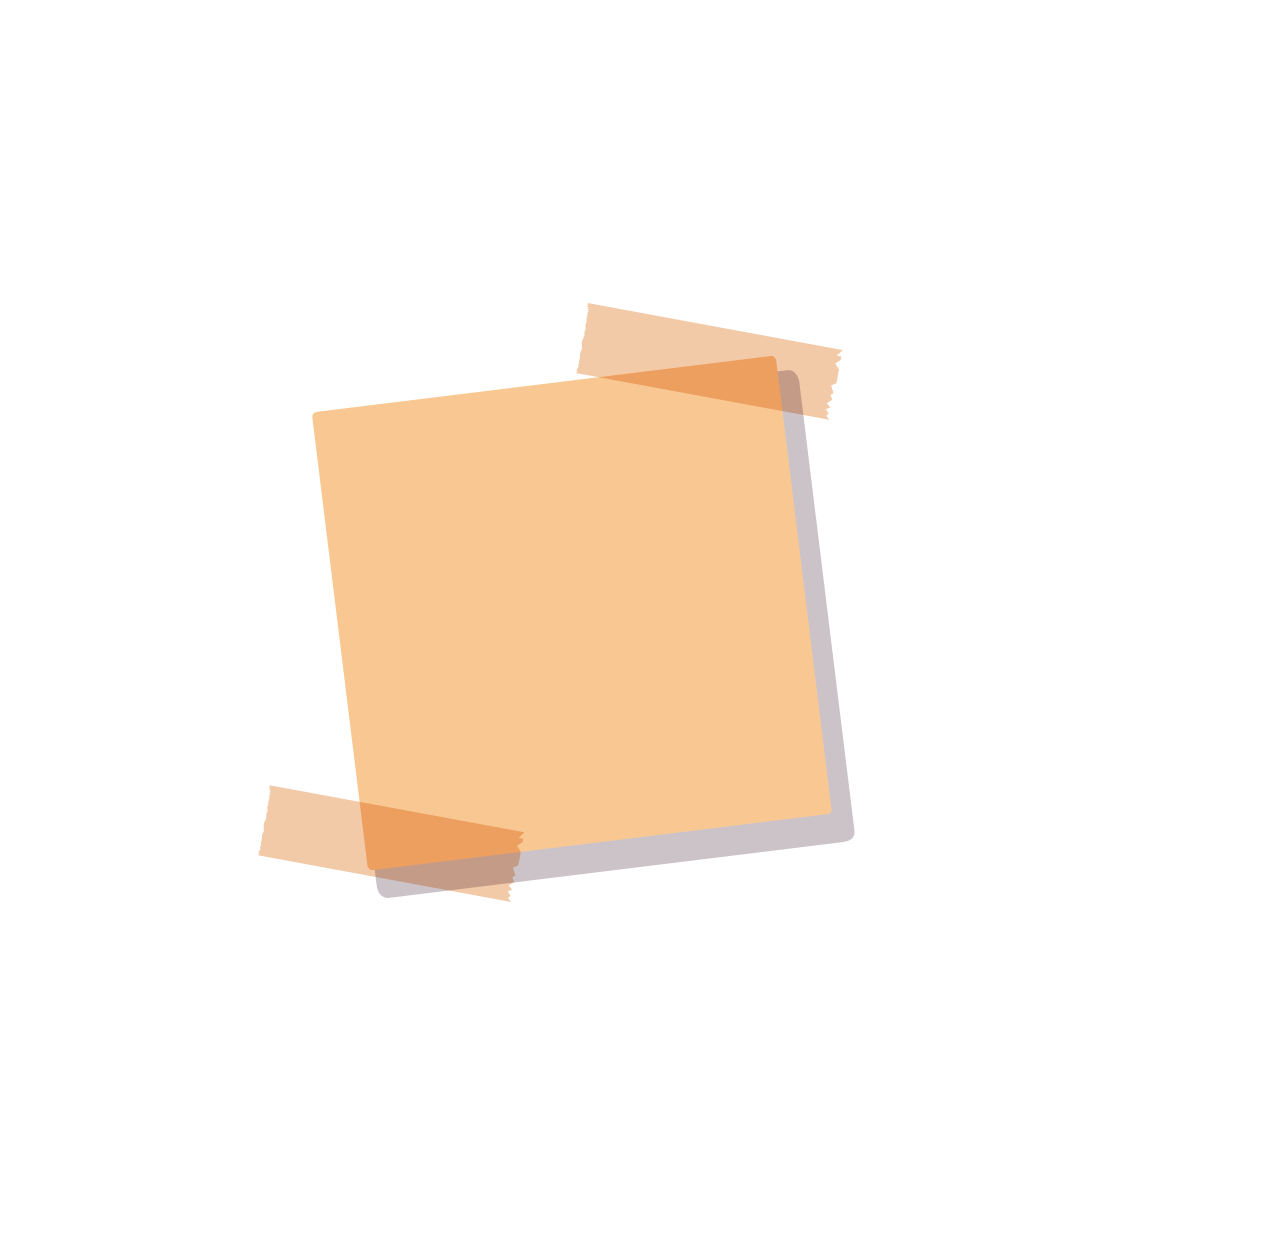 Sticky Notes PNG Image HD